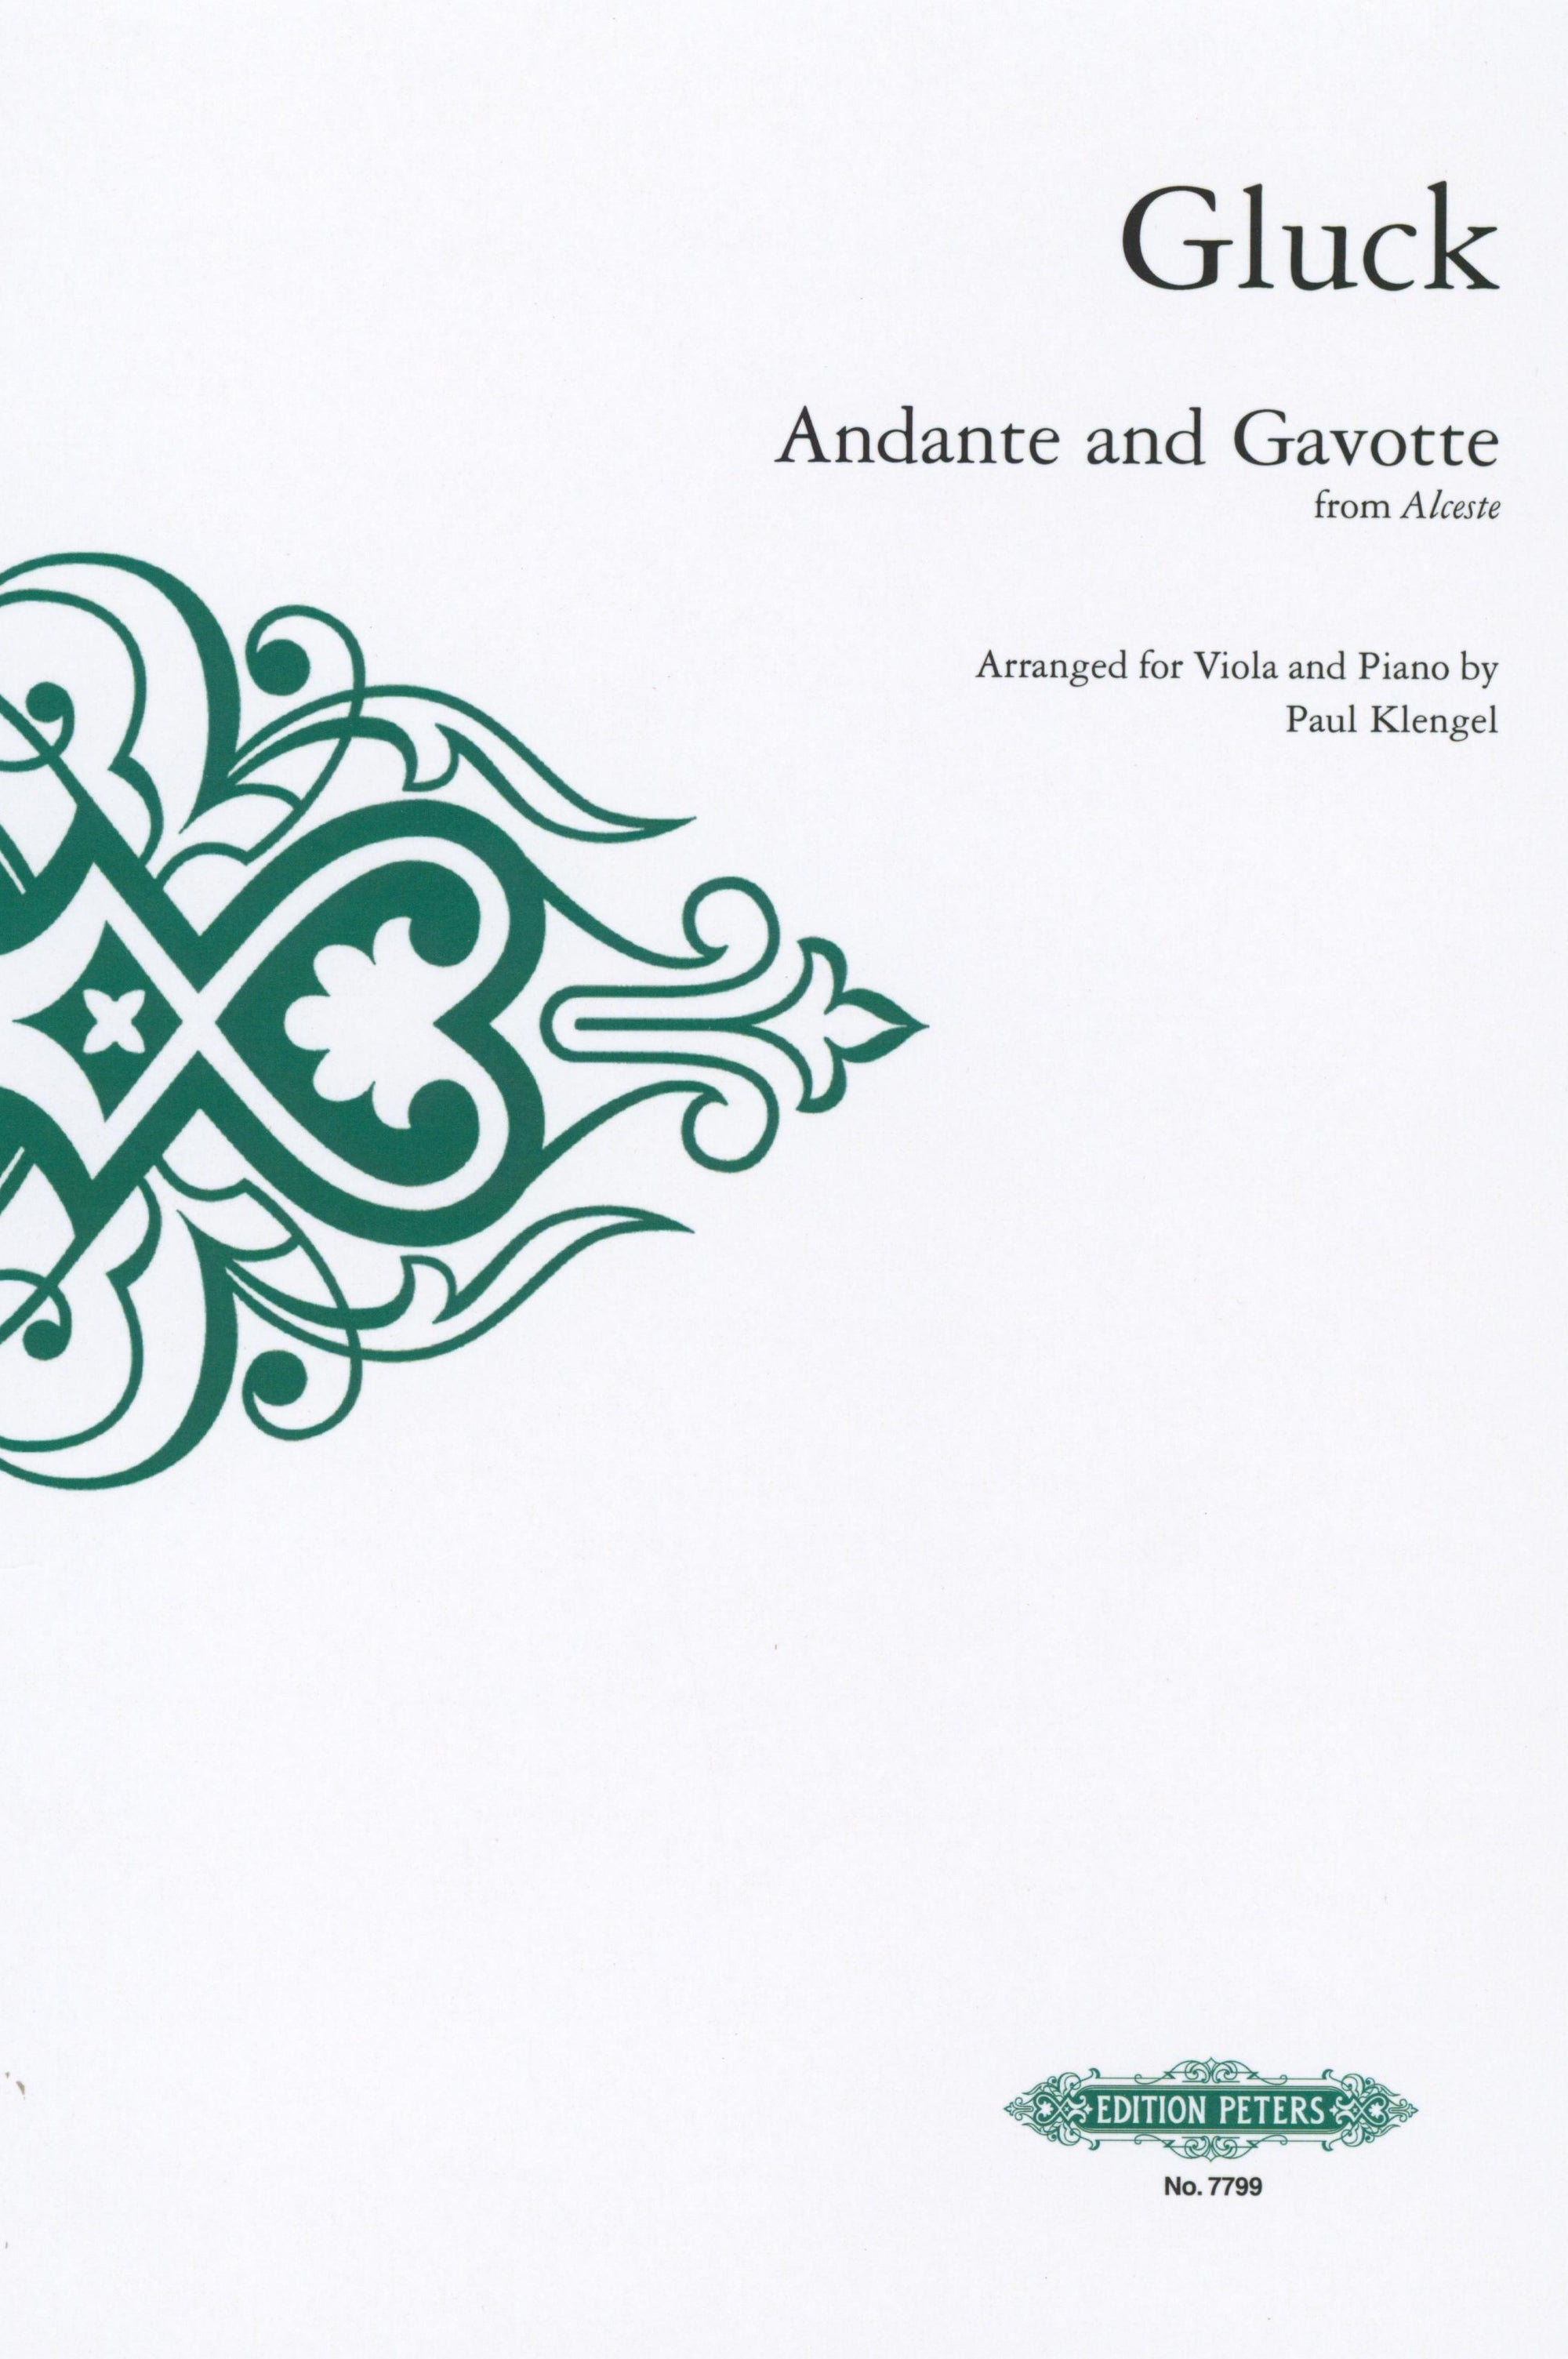 Gluck: Andante and Gavotte from Alceste (arr. for viola and piano)